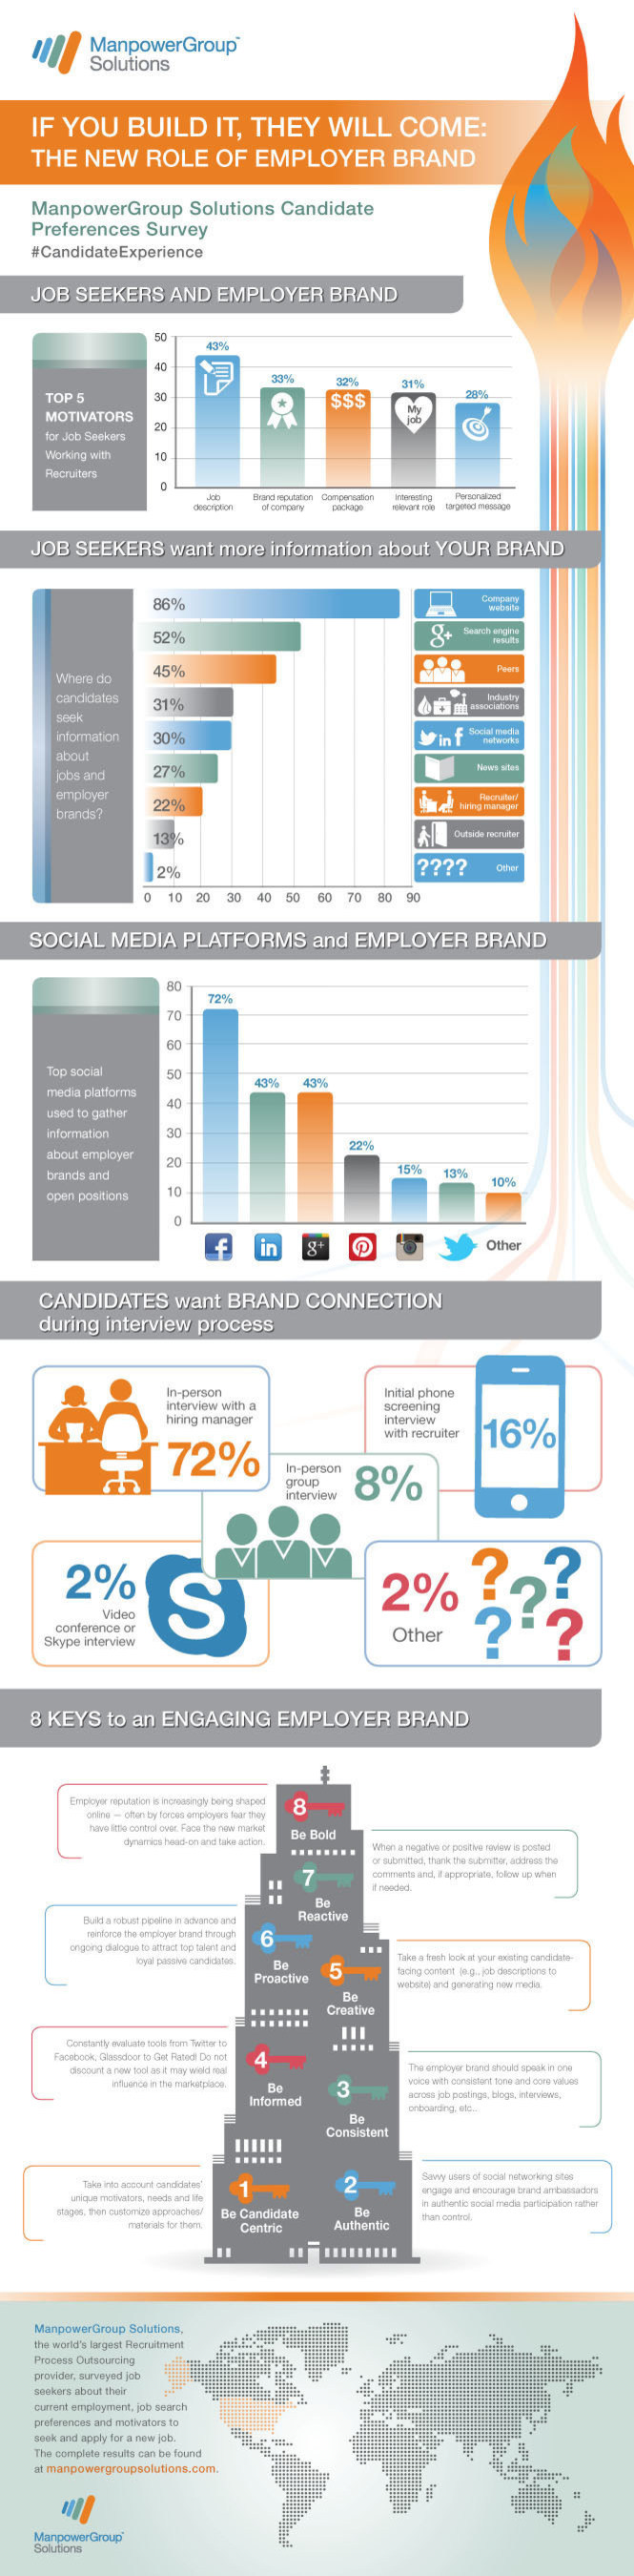 ManpowerGroup Solutions' Candidate Preferences Survey shows candidates are increasingly seeking employers with a clear corporate identity and positive reputation. Brand reputation is now as important as type of work and pay when it comes to a candidate's motivation.